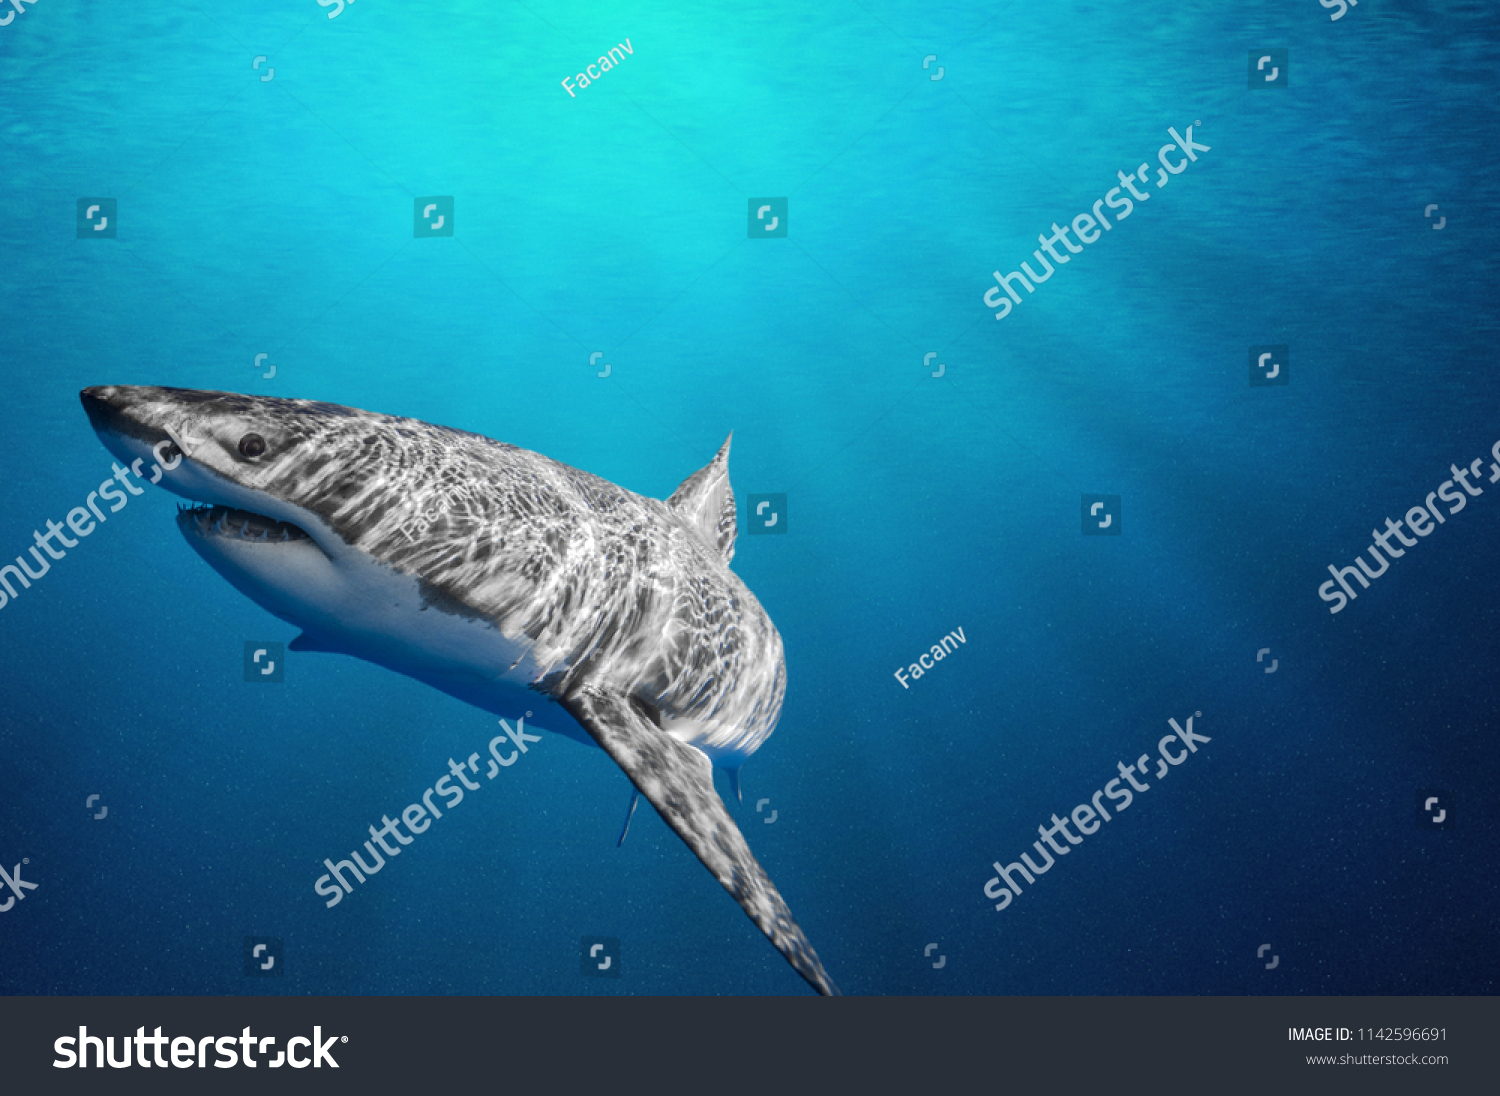 Fantastic detail in the deep clear blue water. Portrait of a shark up close. Clear blue ocean water and sunlight beneath the surface of water in the background. #1142596691